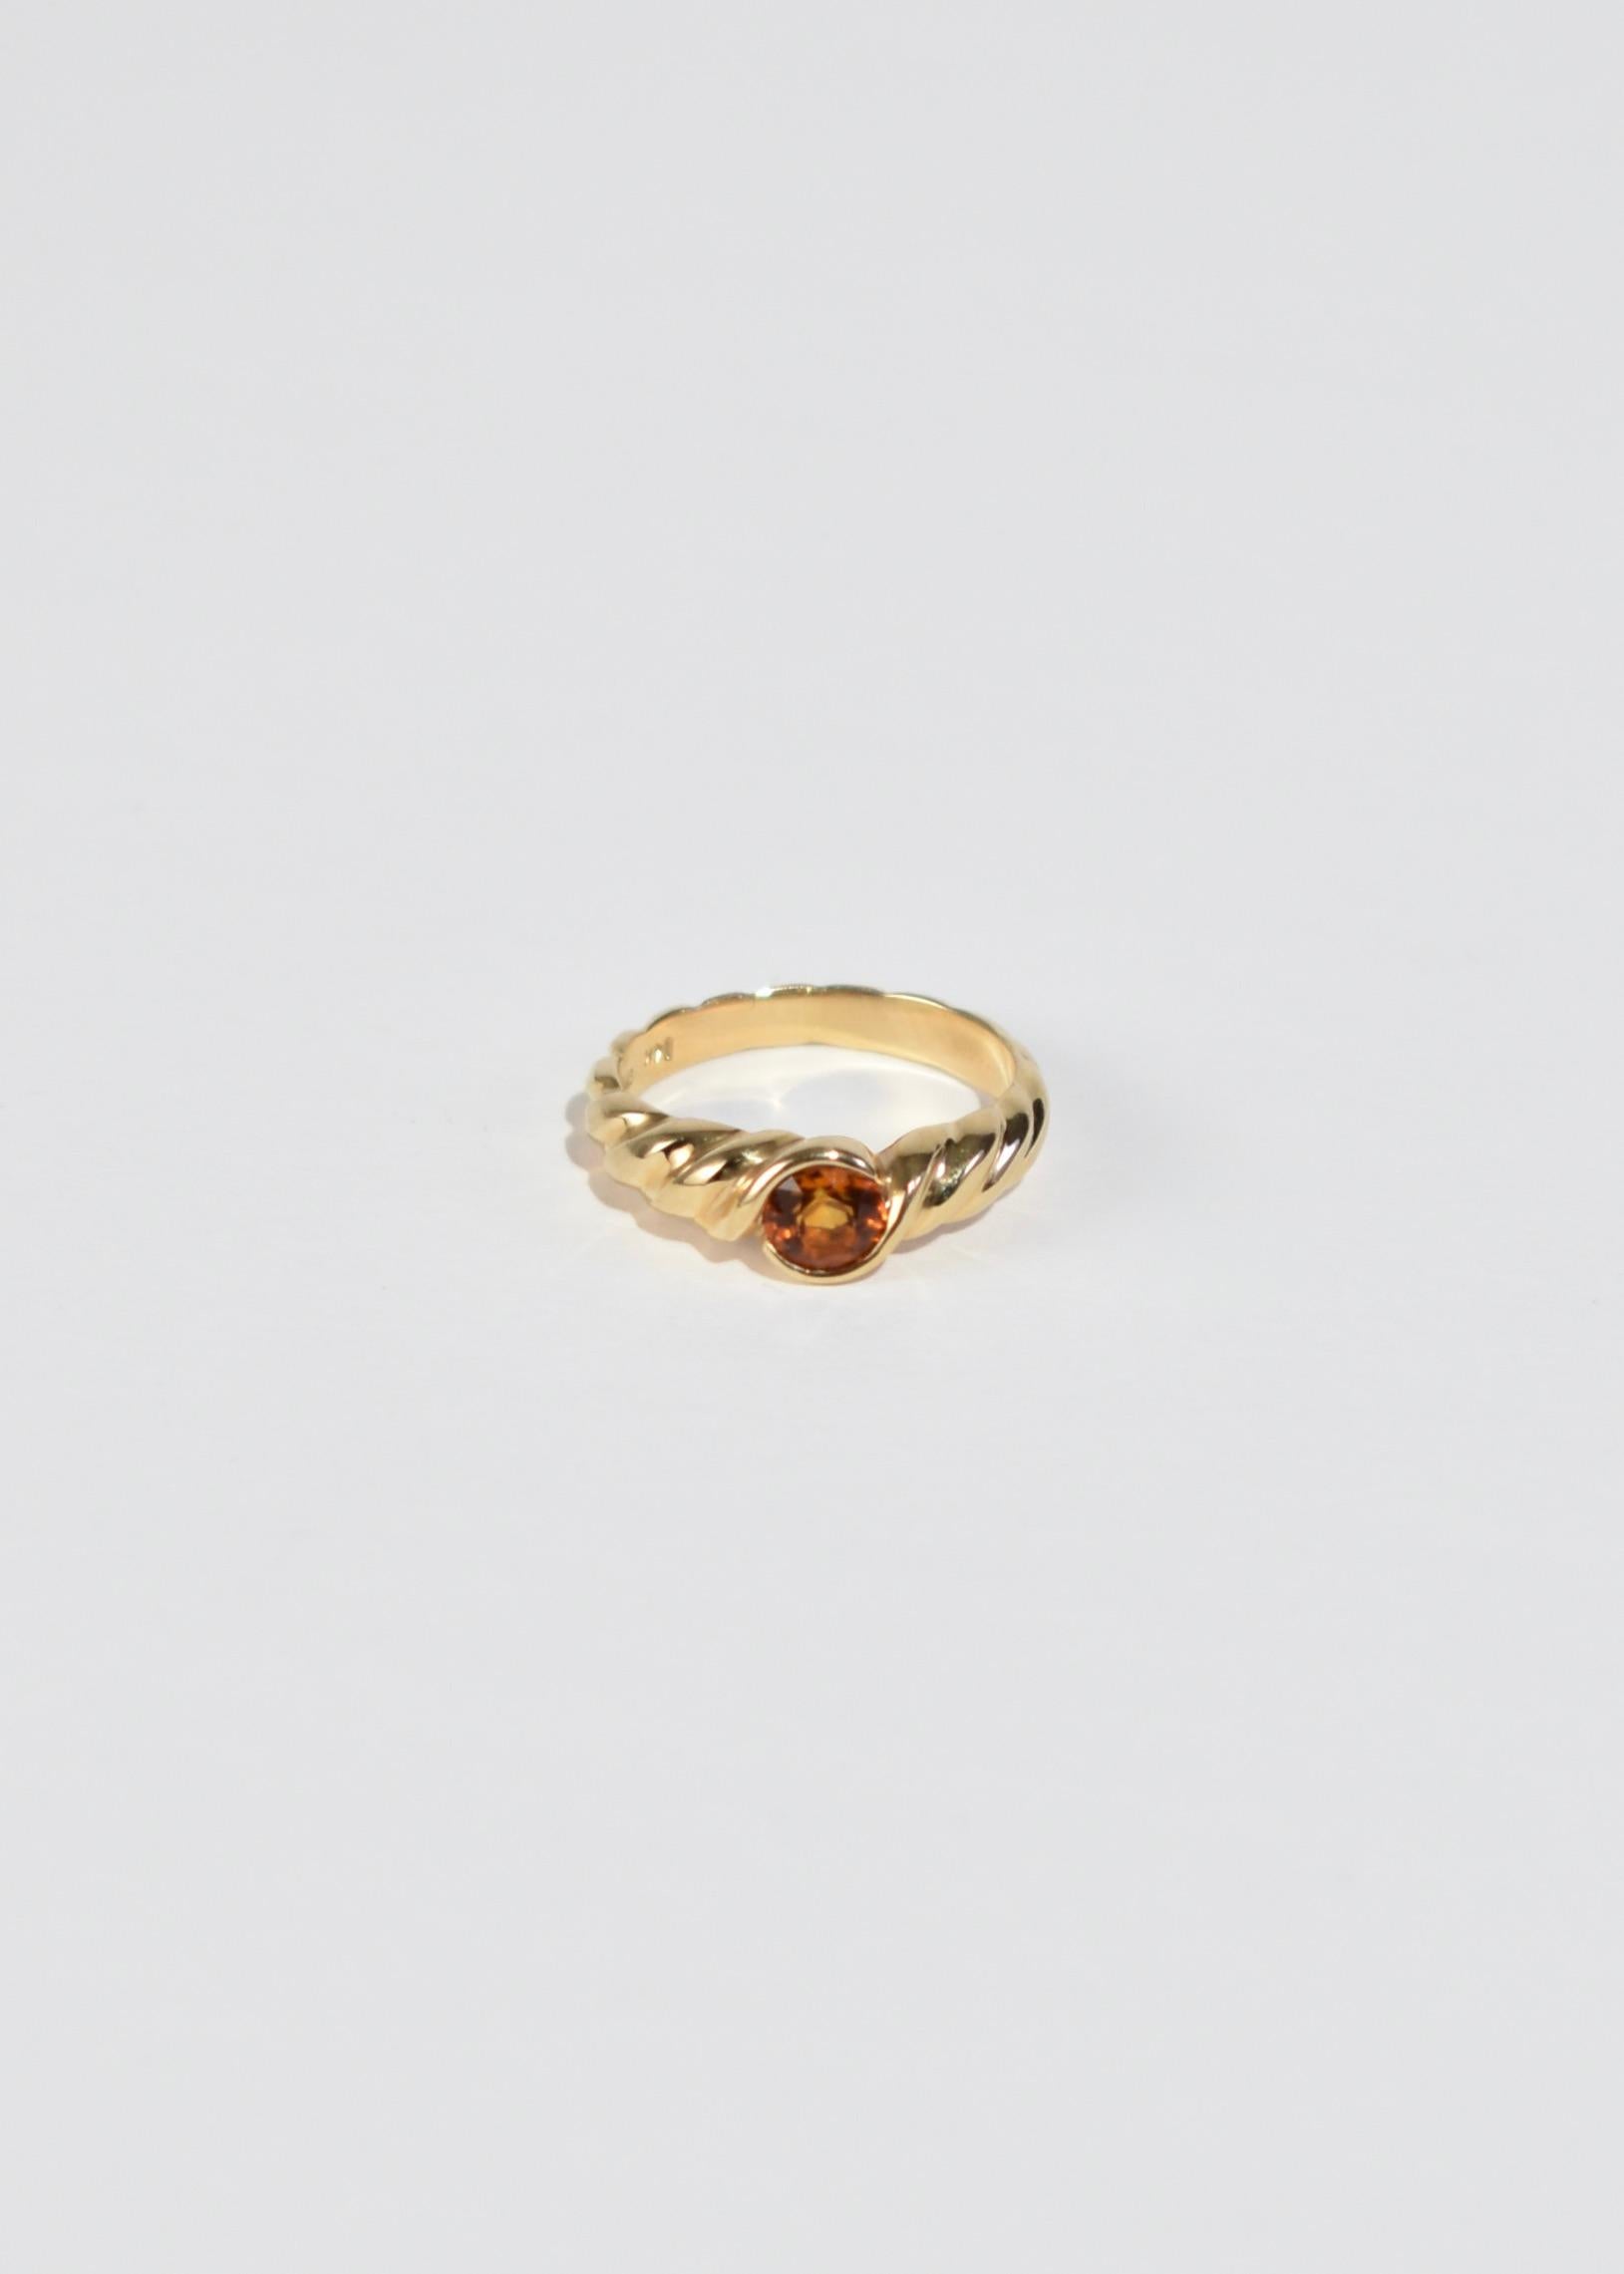 Gold Topaz Ring In Excellent Condition For Sale In Richmond, VA